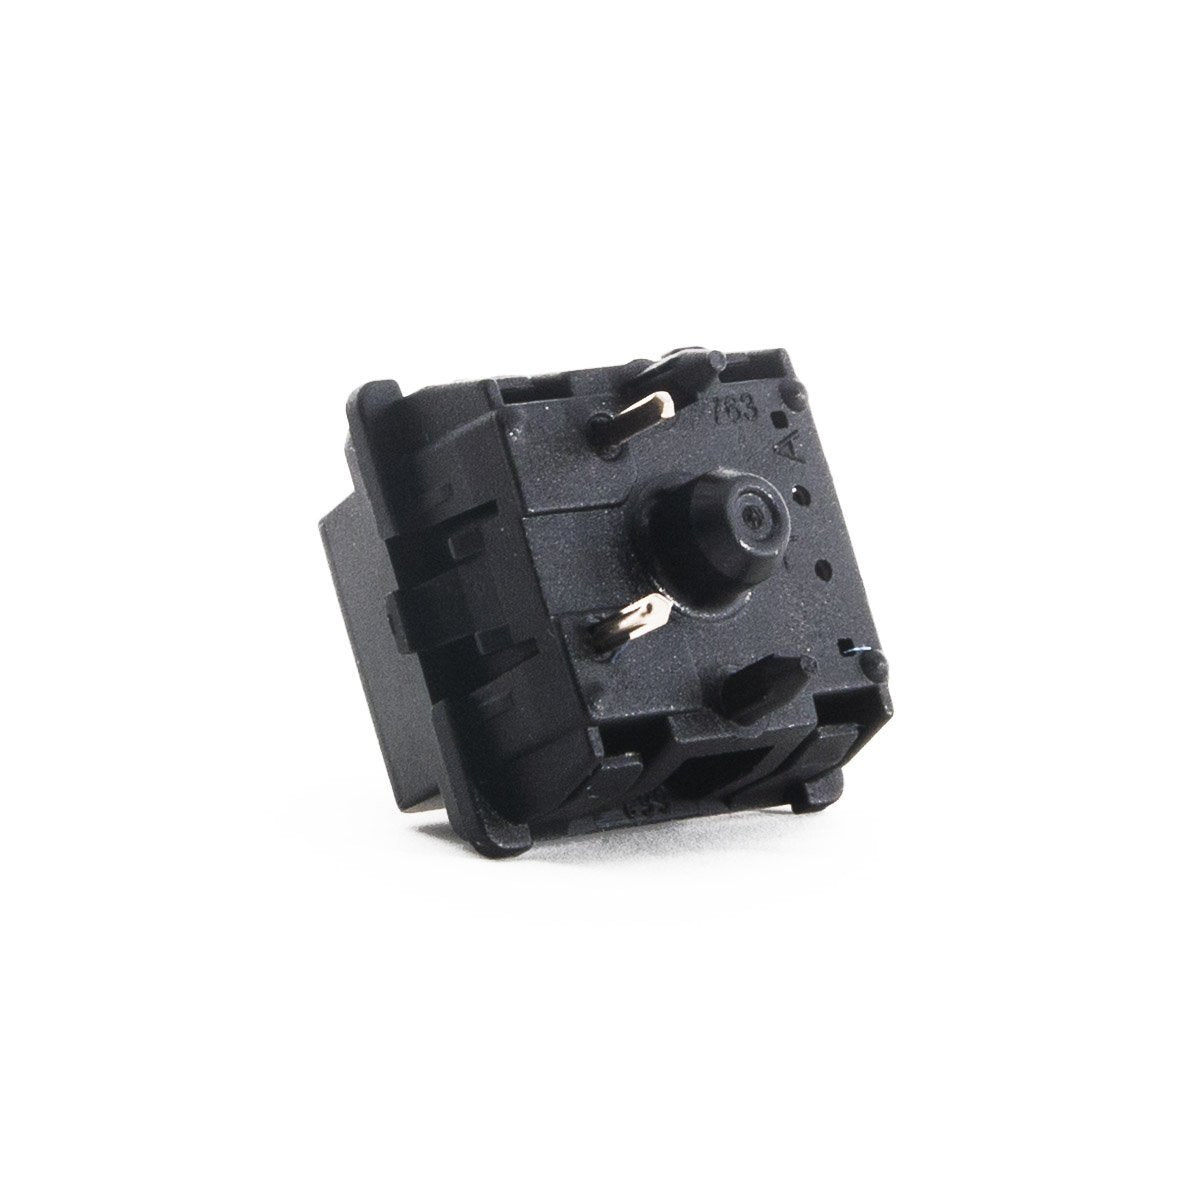 Cherry MX Hyperglide PCB Mount Switches - Divinikey